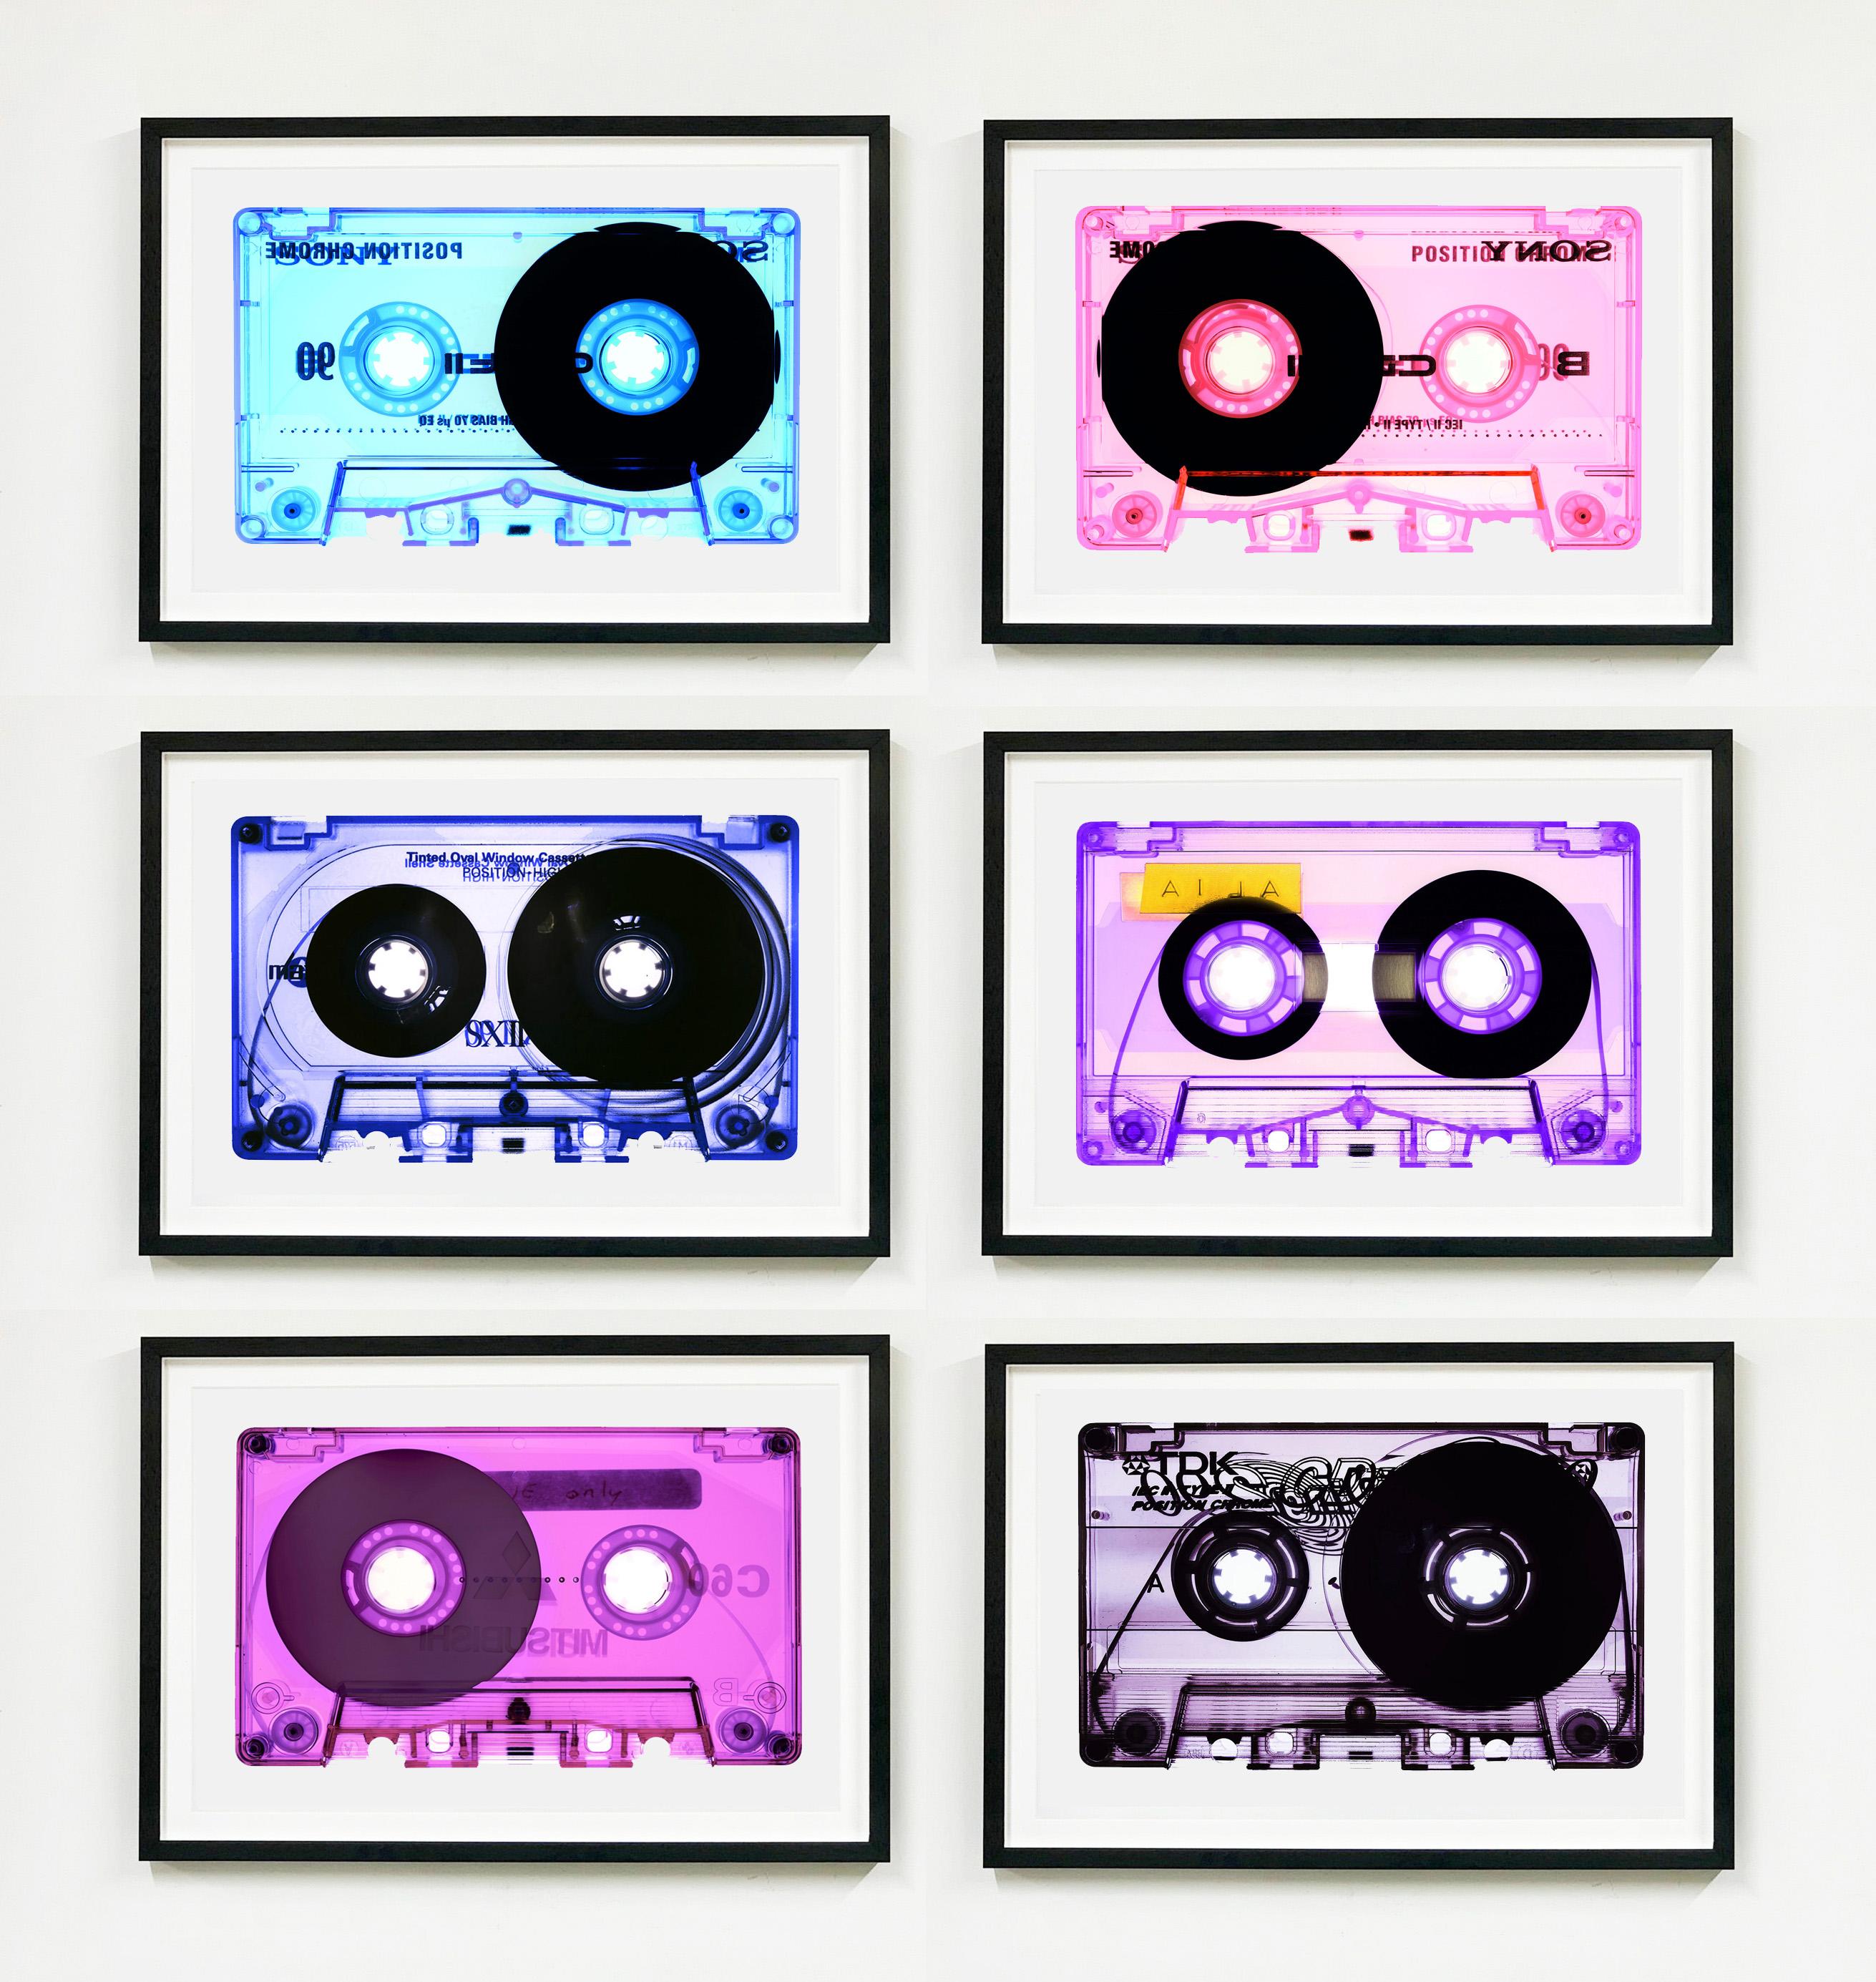 Tape Collection, Blue Tinted Cassette - Contemporary Pop Art Color Photography - Black Print by Heidler & Heeps